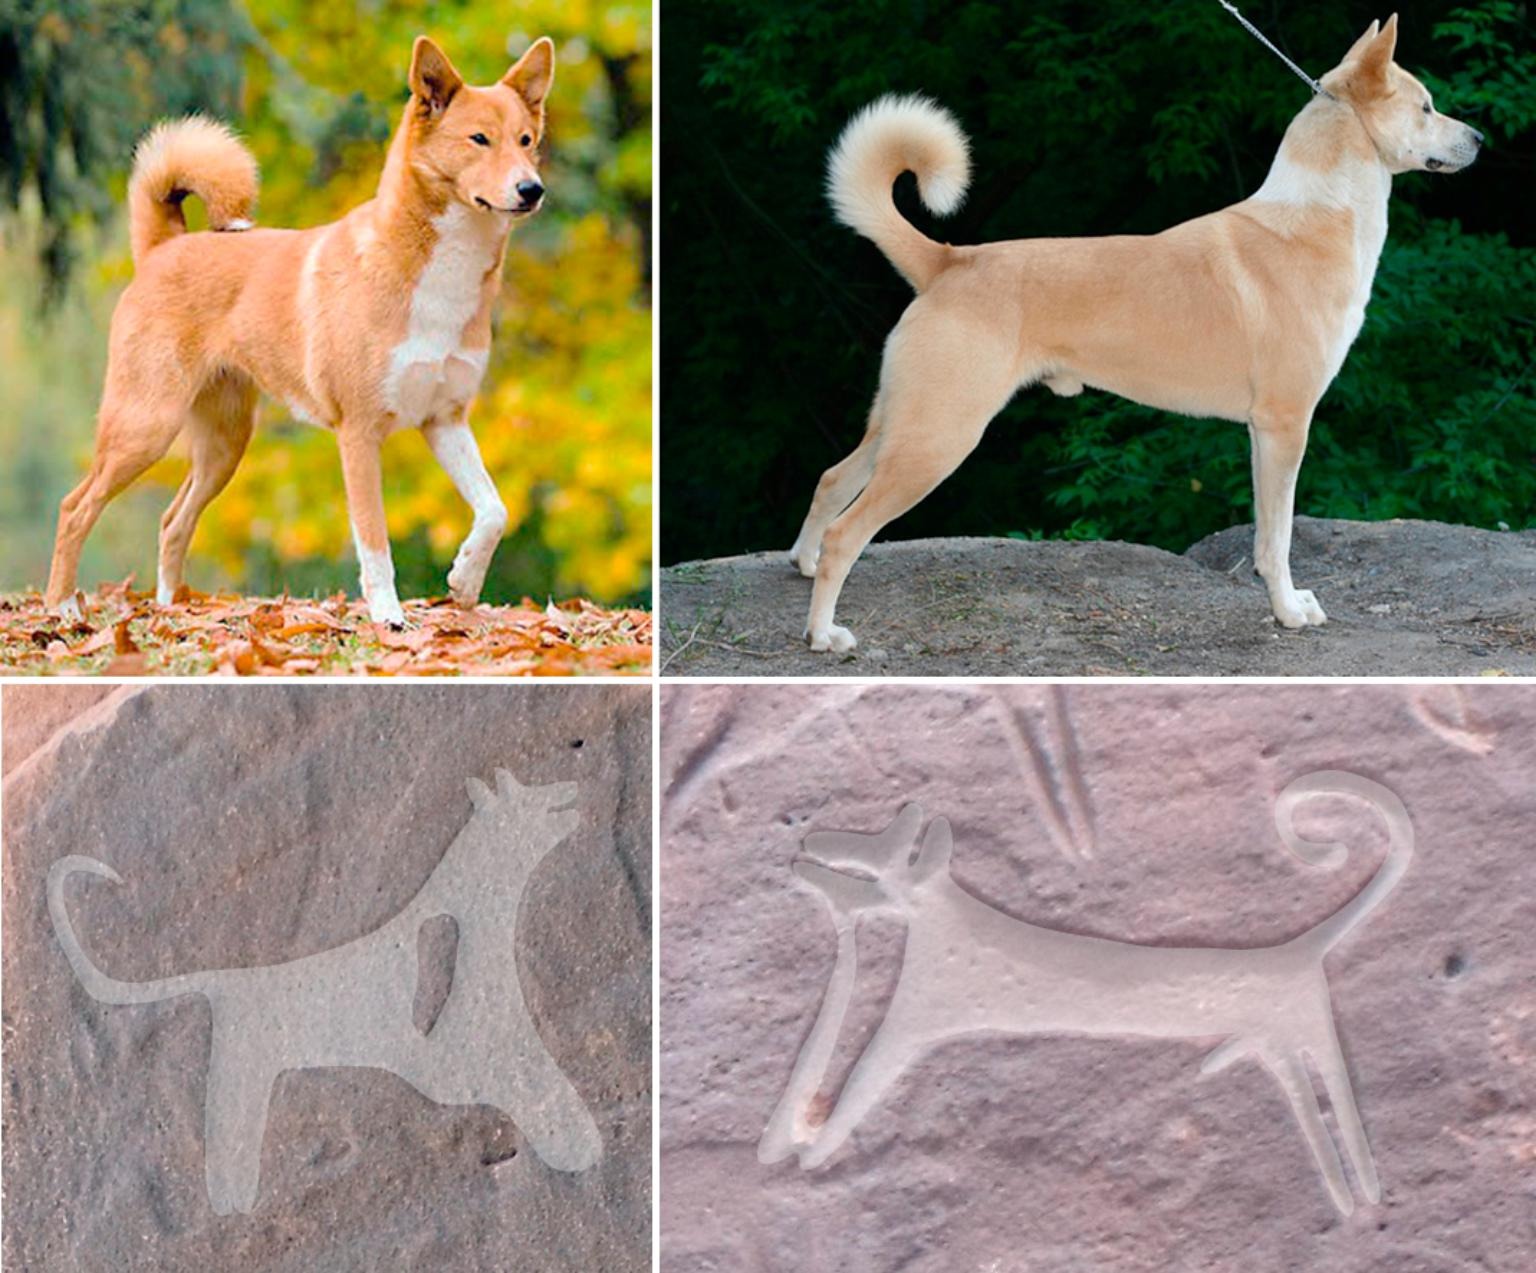 Ancient Cave Art Depicts Oldest Evidence Of Dogs Wearing Leashes